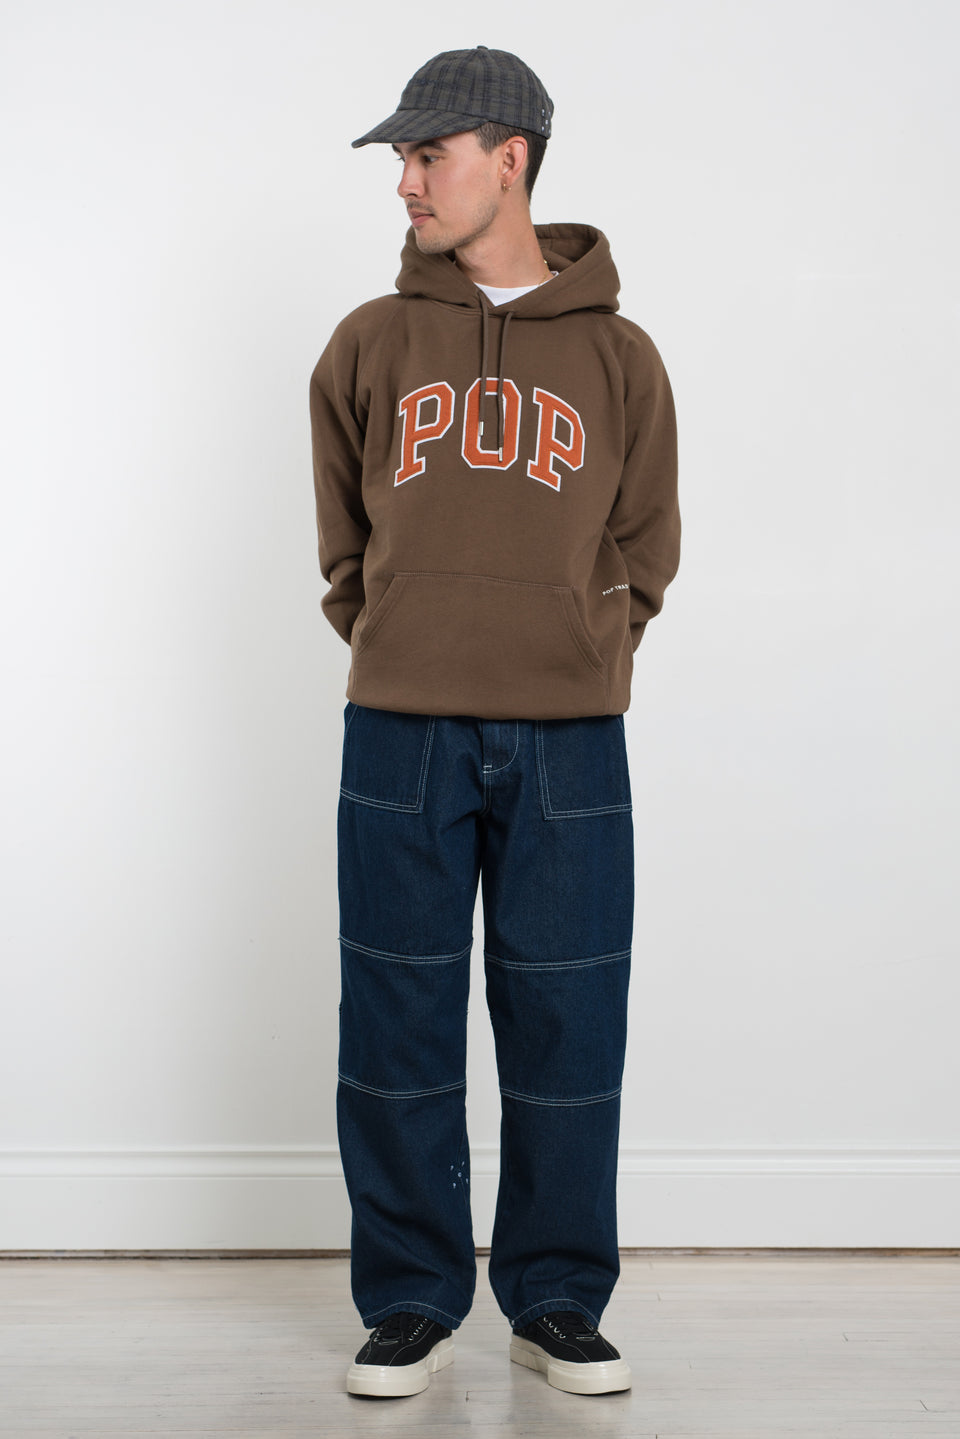 Pop Trading Company AW22 FW22 Arch Hooded Sweat Rain Drum Calculus Victoria BC Canada